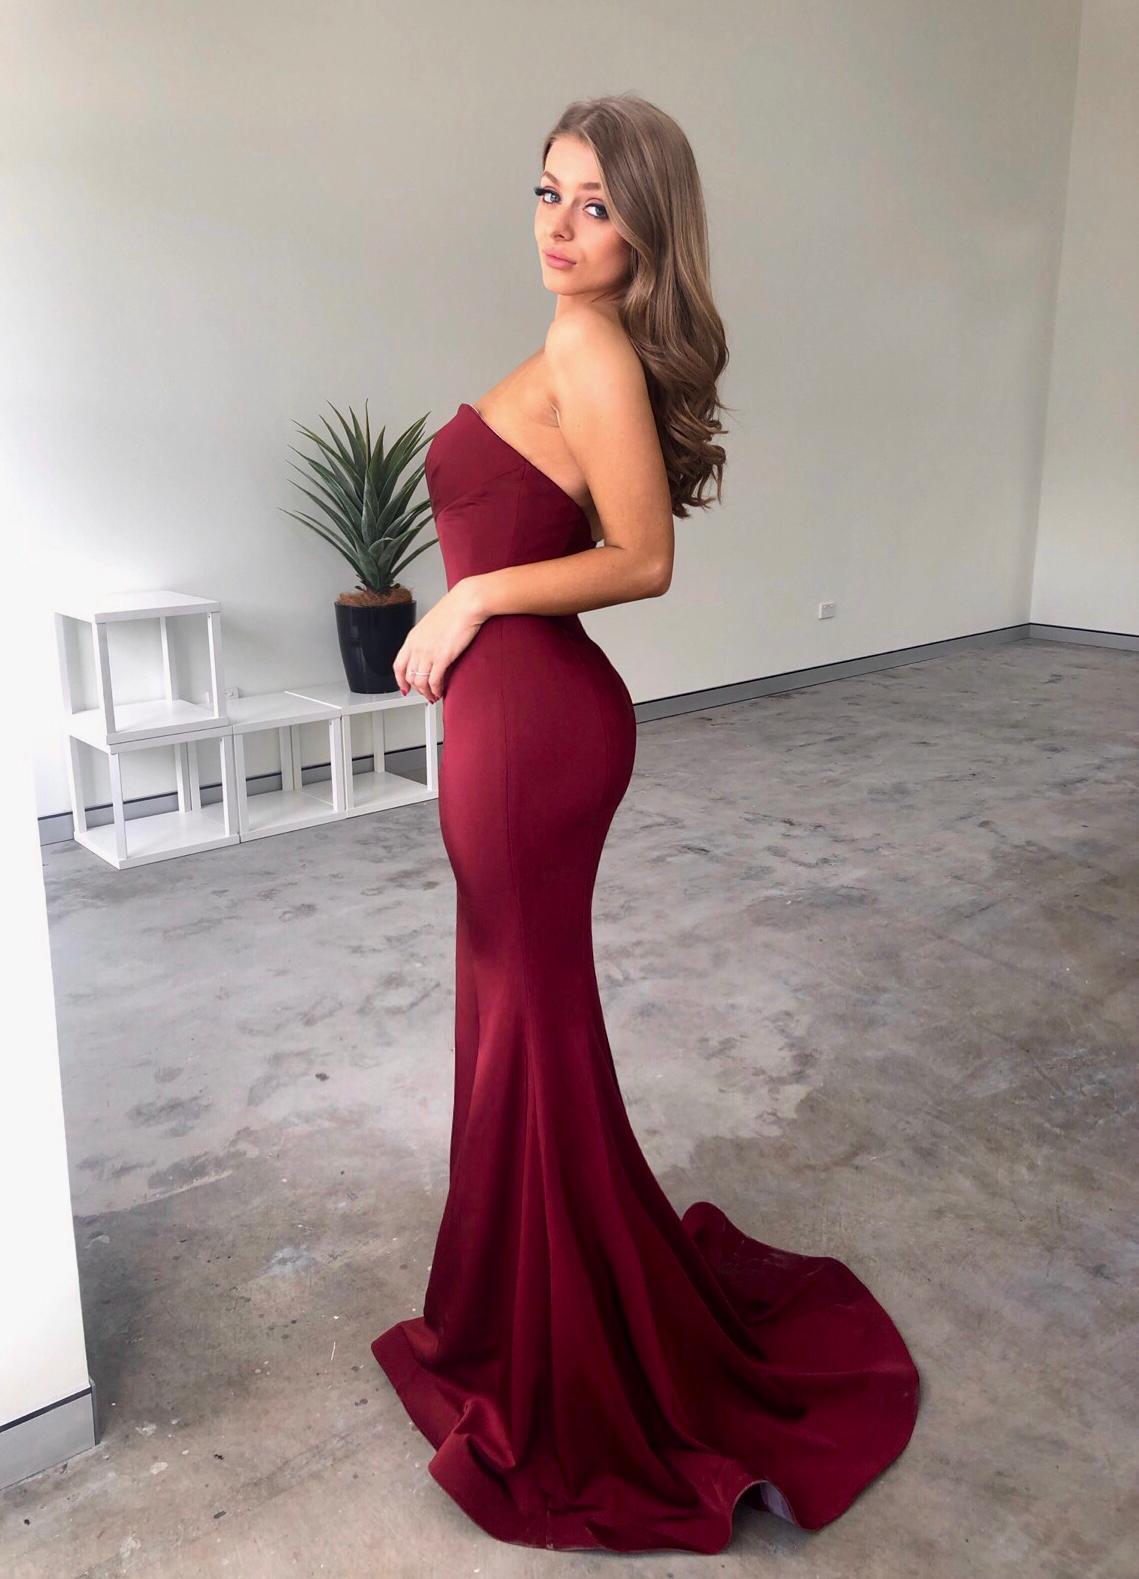 Tina Holly Couture Designer BA651 Burgundy Satin Strapless Mermaid Formal Dress Tina Holly Couture$ AfterPay Humm ZipPay LayBuy Sezzle